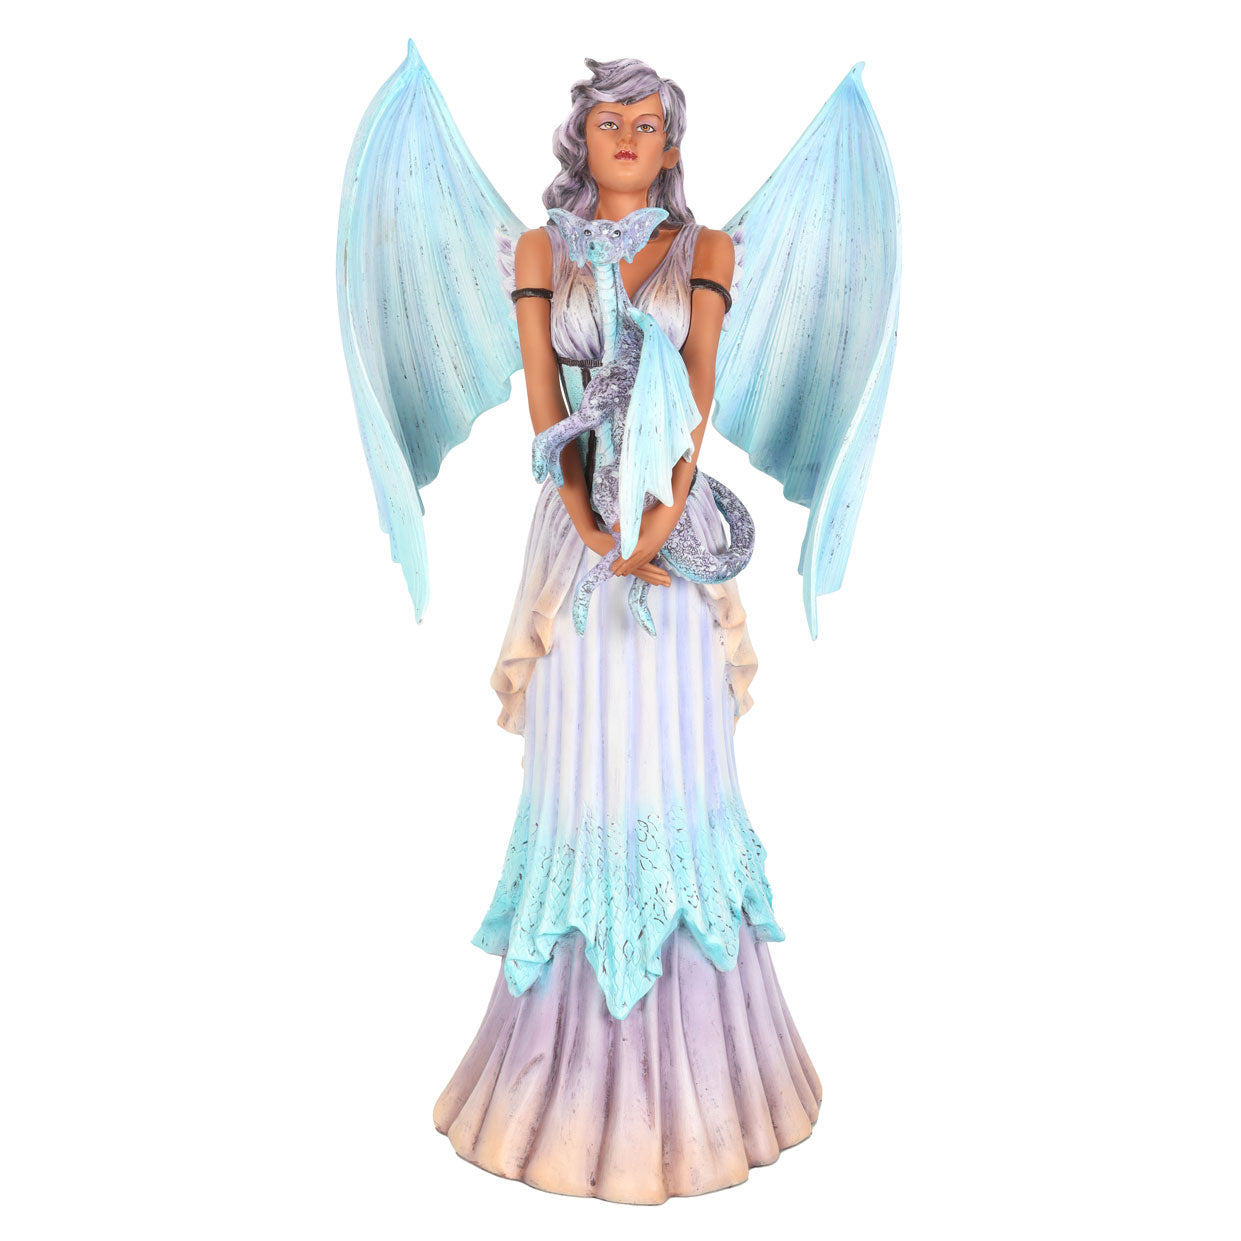 View 41cm Dragon Keeper Fairy Figurine by Amy Brown information